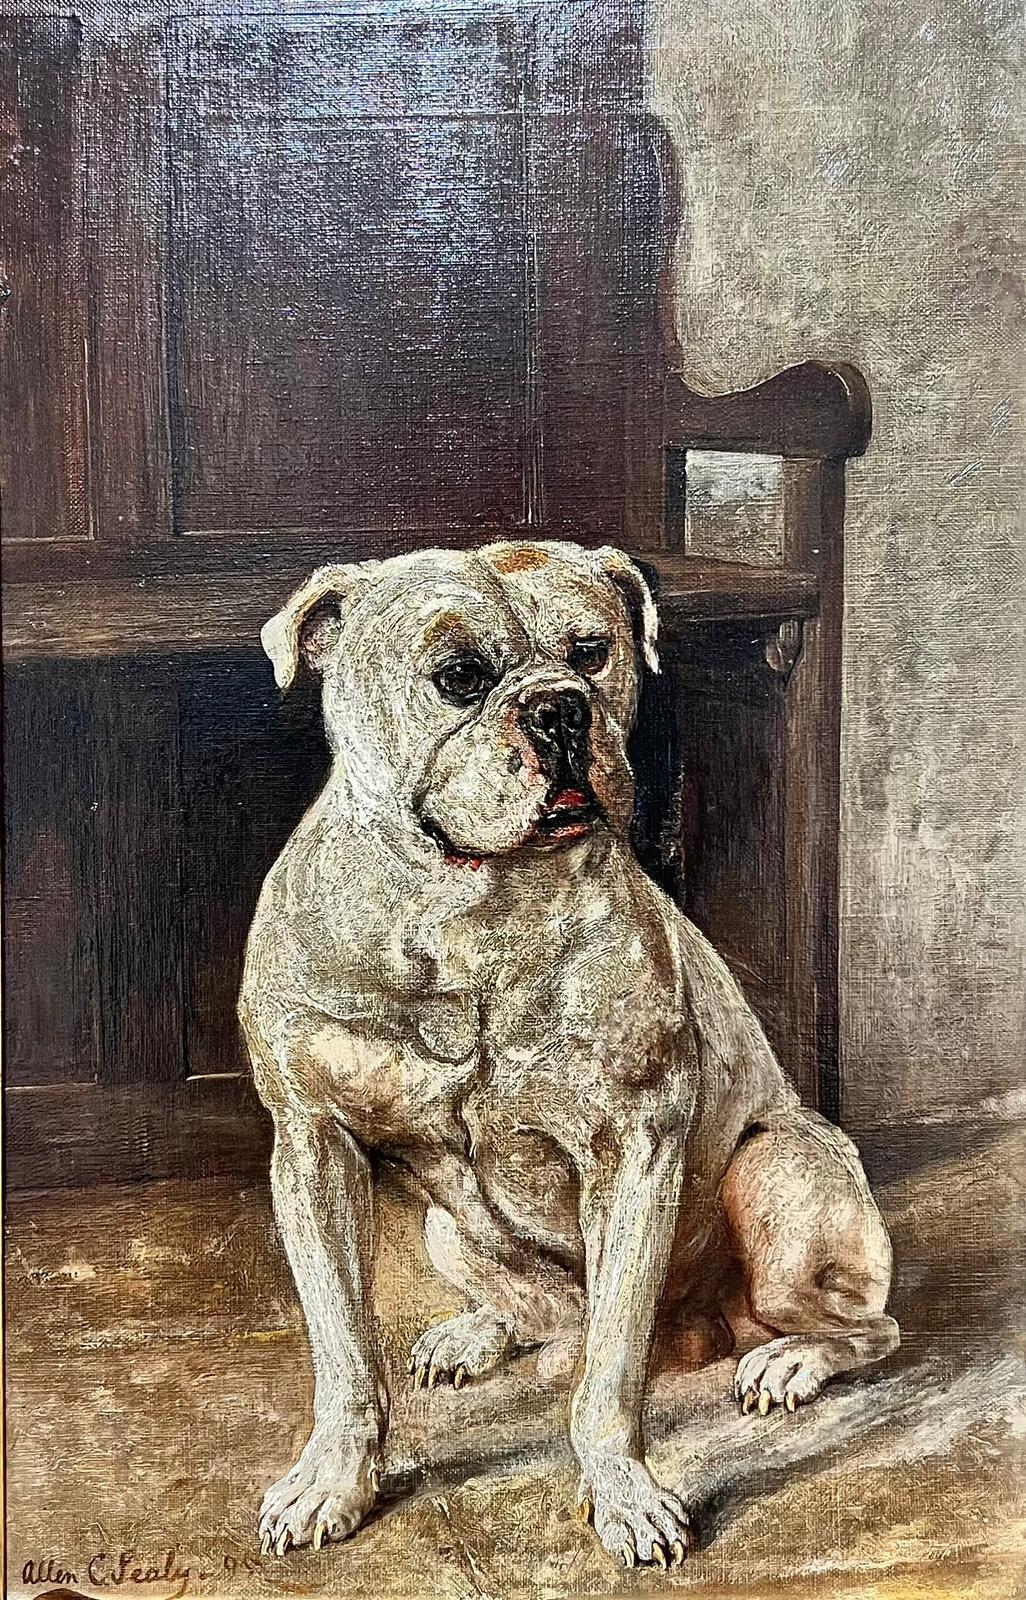 Sitting White Bulldog / Staffordshire Bull Terrier?
Allen Culpepper Sealy (British 1850 - 1927)
signed and dated (18)95
framed: 26.5 x 20 inches
canvas: 18 x 11.5 inches
signed oil on canvas, framed
provenance: private collection,